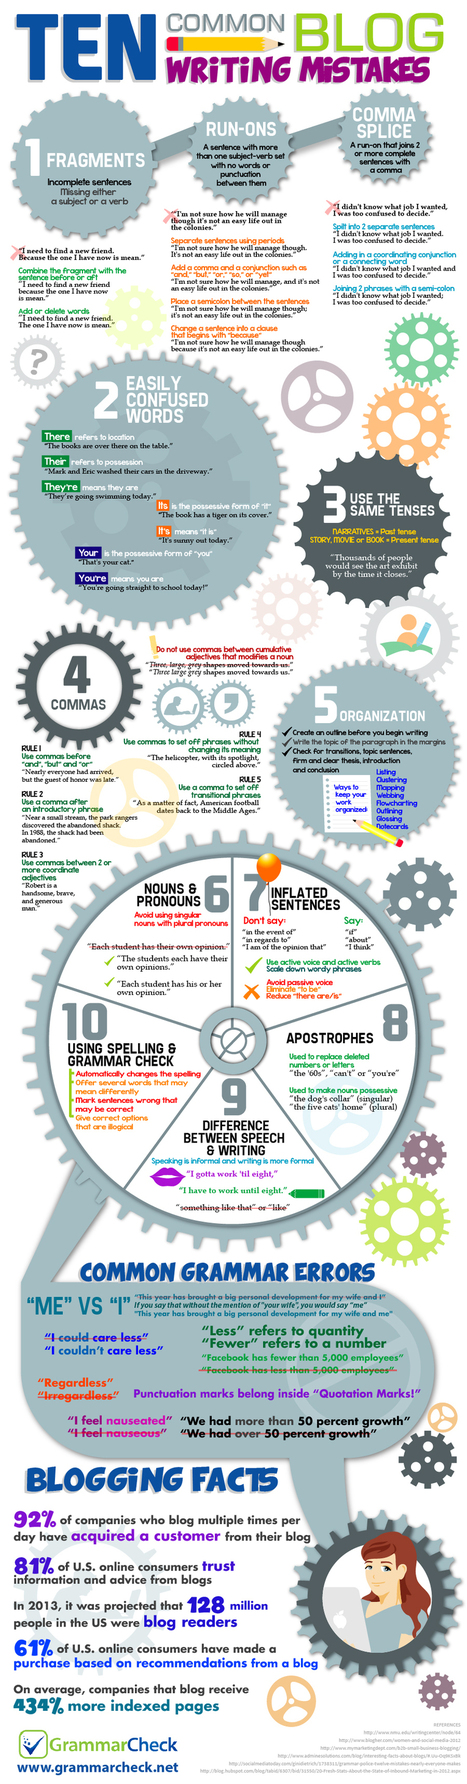 10 Common Blog Writing Mistakes (Infographic) | Daily Magazine | Scoop.it